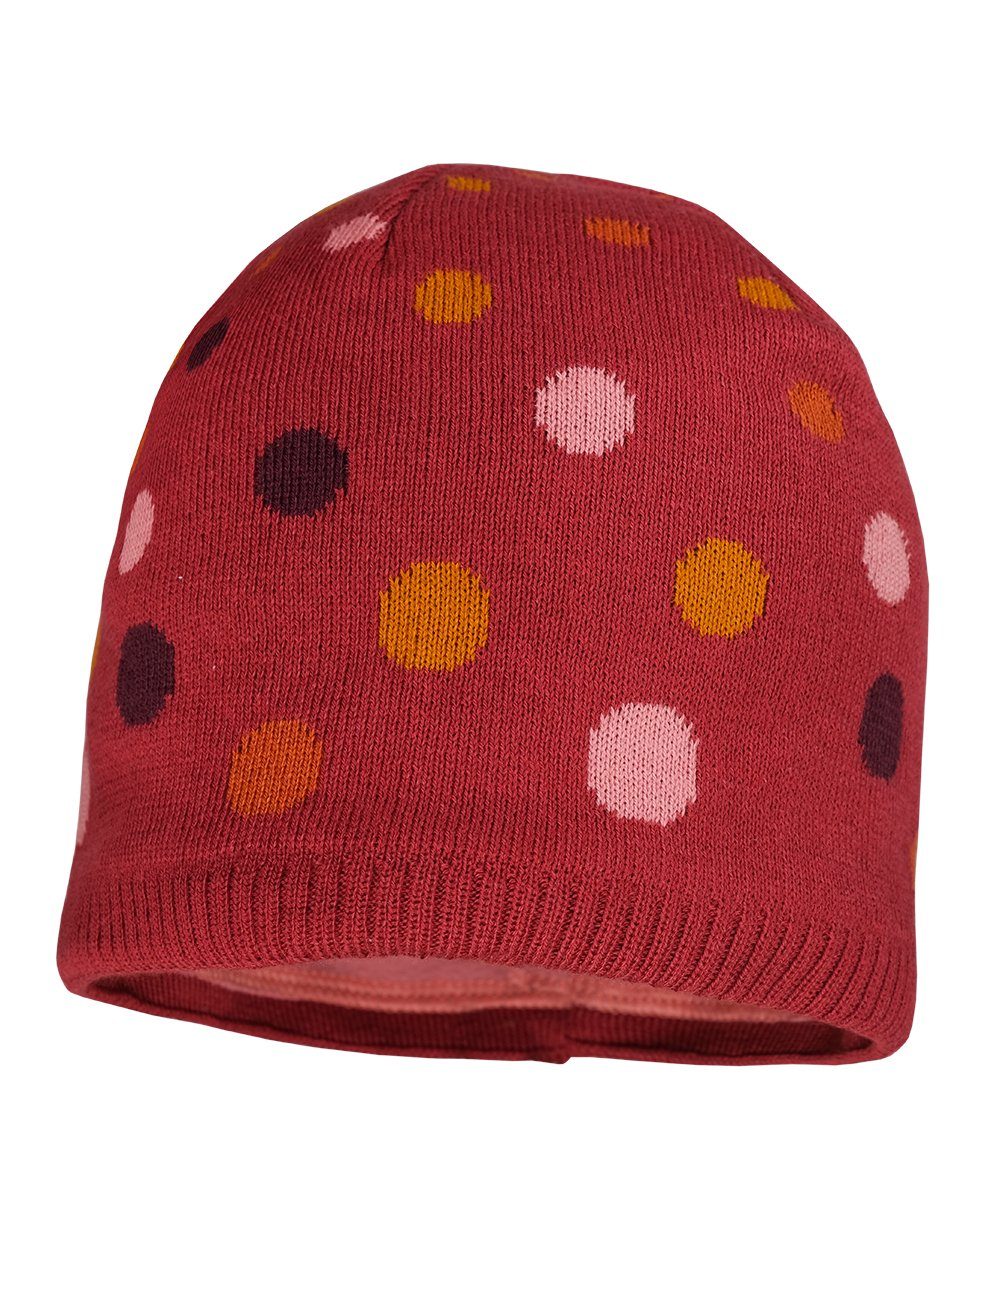 GIRL-Beanie Made Jerseyfutter Germany Strickmütze MAXIMO in MINI Jacquard Punkte, rosewood